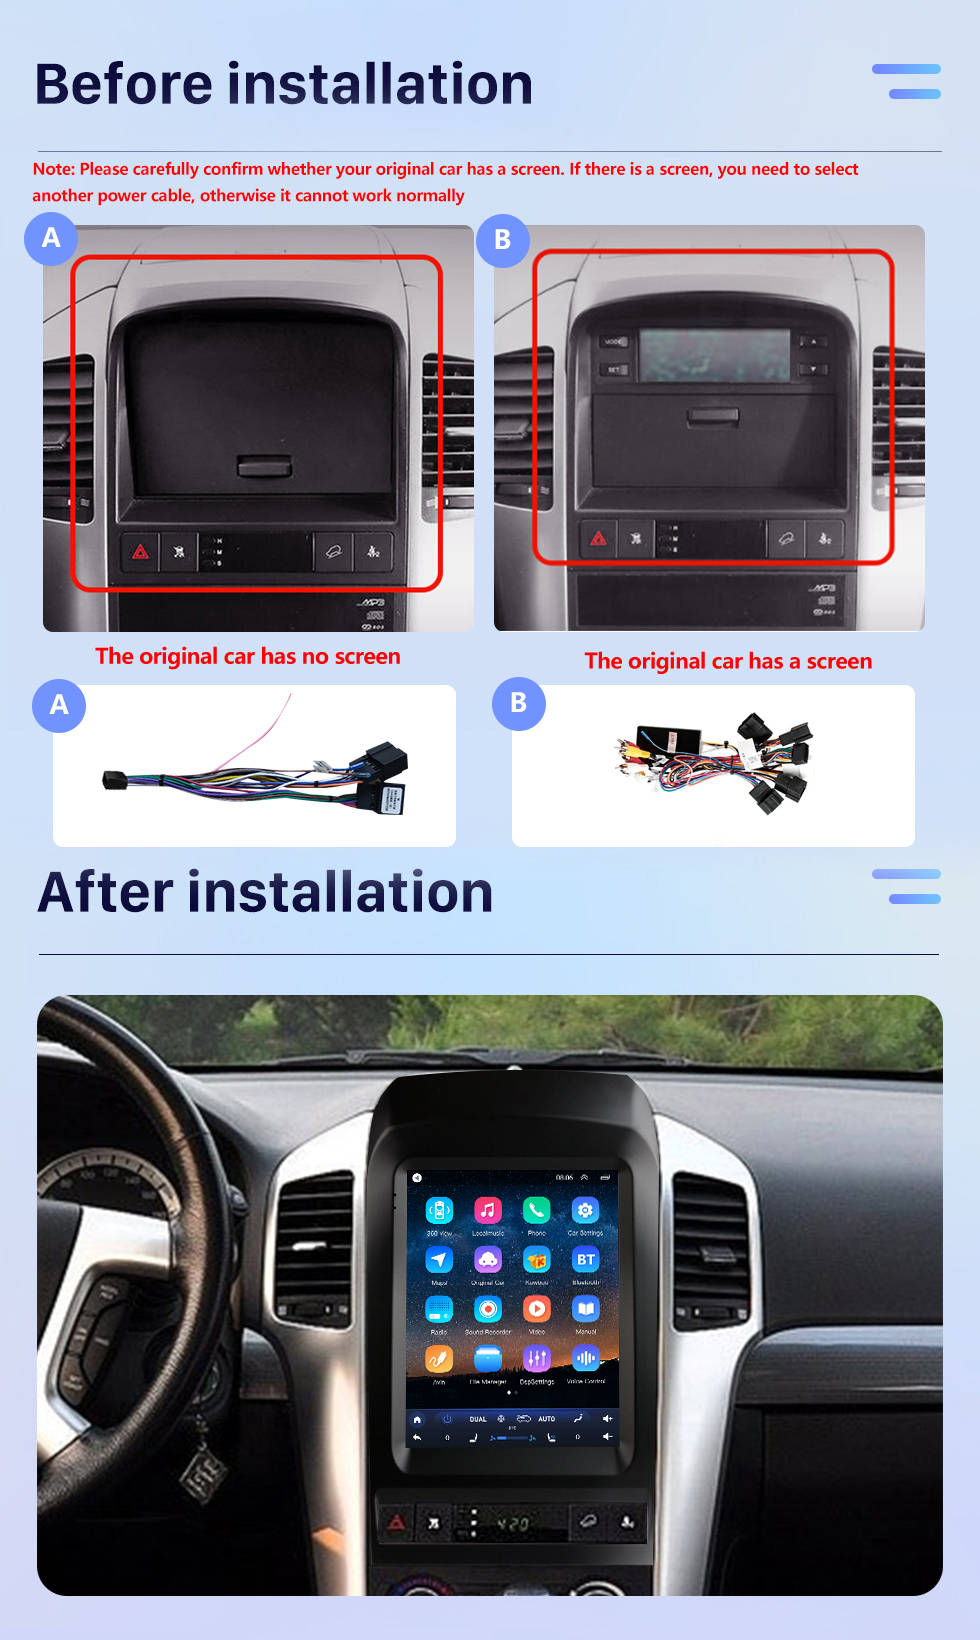 Seicane 9.7 inch Android 10.0 Head Unit GPS Navigation for 2006-2012 Chevy Chevrolet Captiva USB Radio with USB Bluetooth WIFI Support DVR OBD2 TPMS Steering Wheel Control